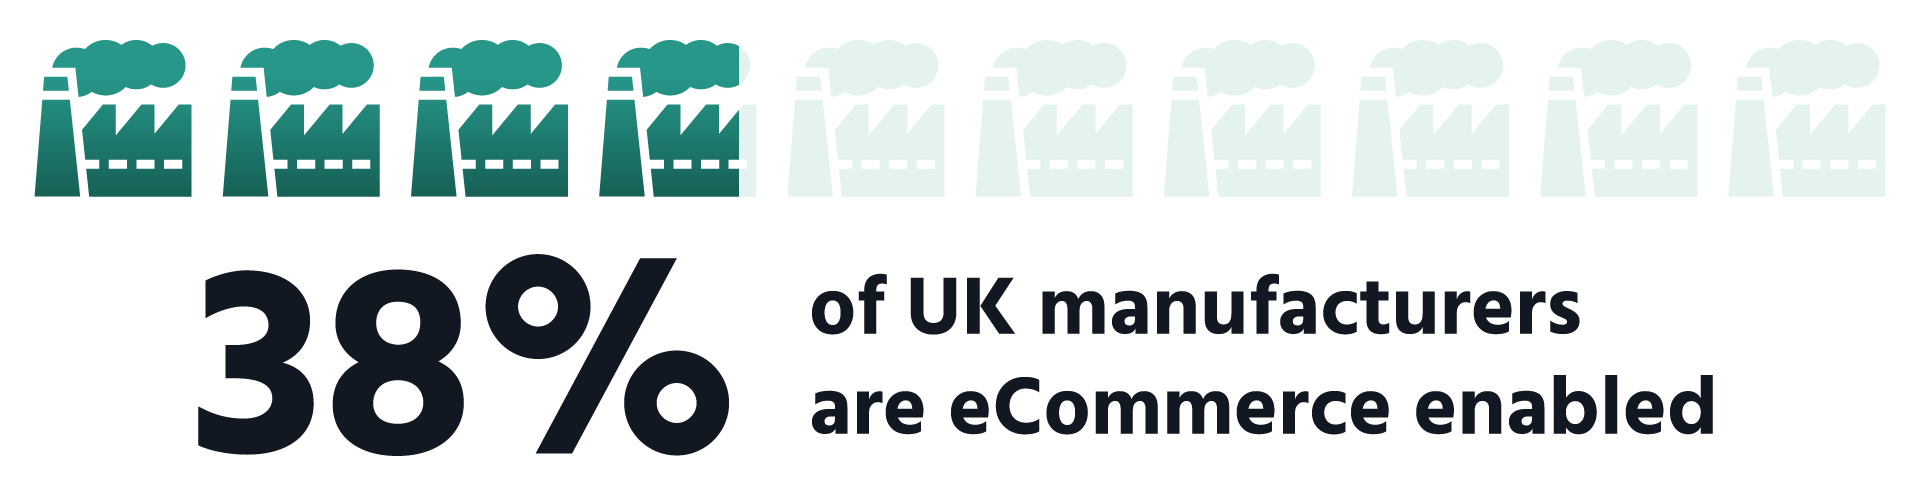 Percentage-of-E-Commerce-Enabled-UK-Manufacturers